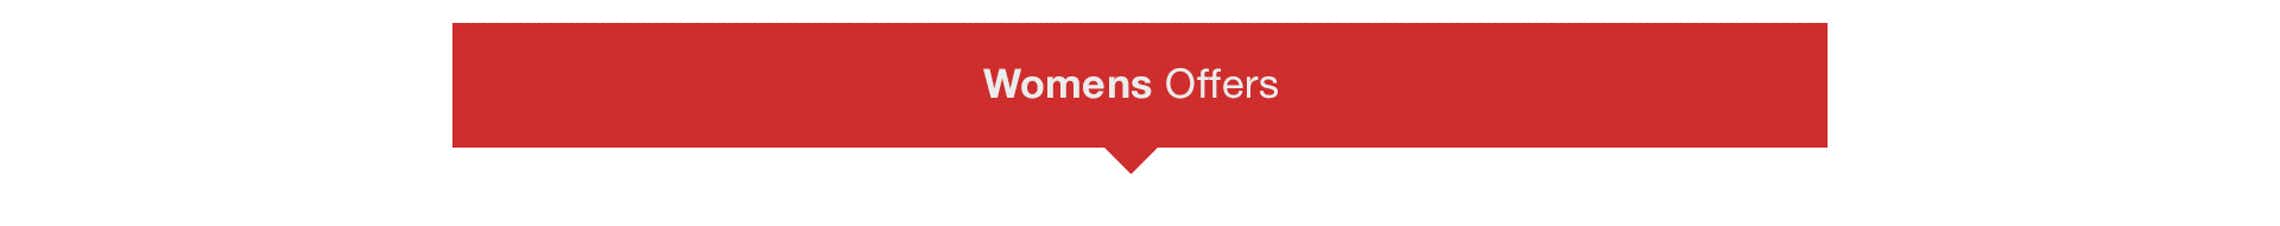 Womens Offers